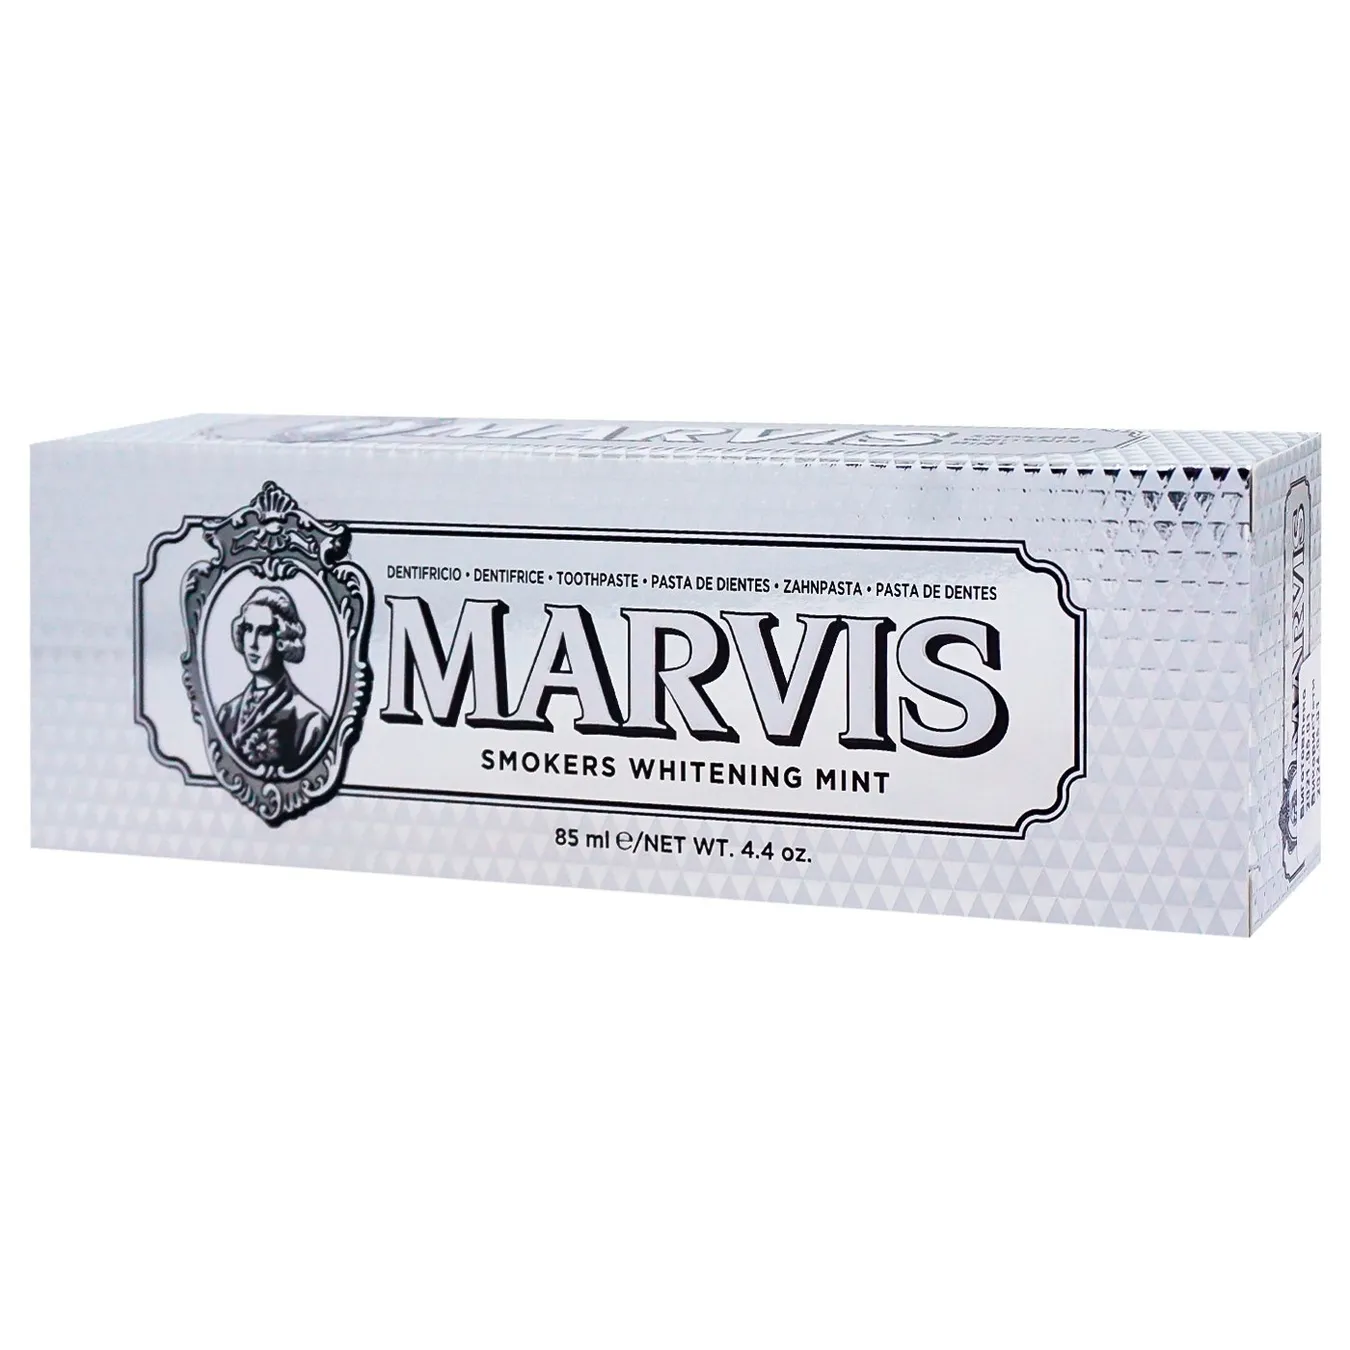 Marvis whitening mint toothpaste for smokers 85 ml